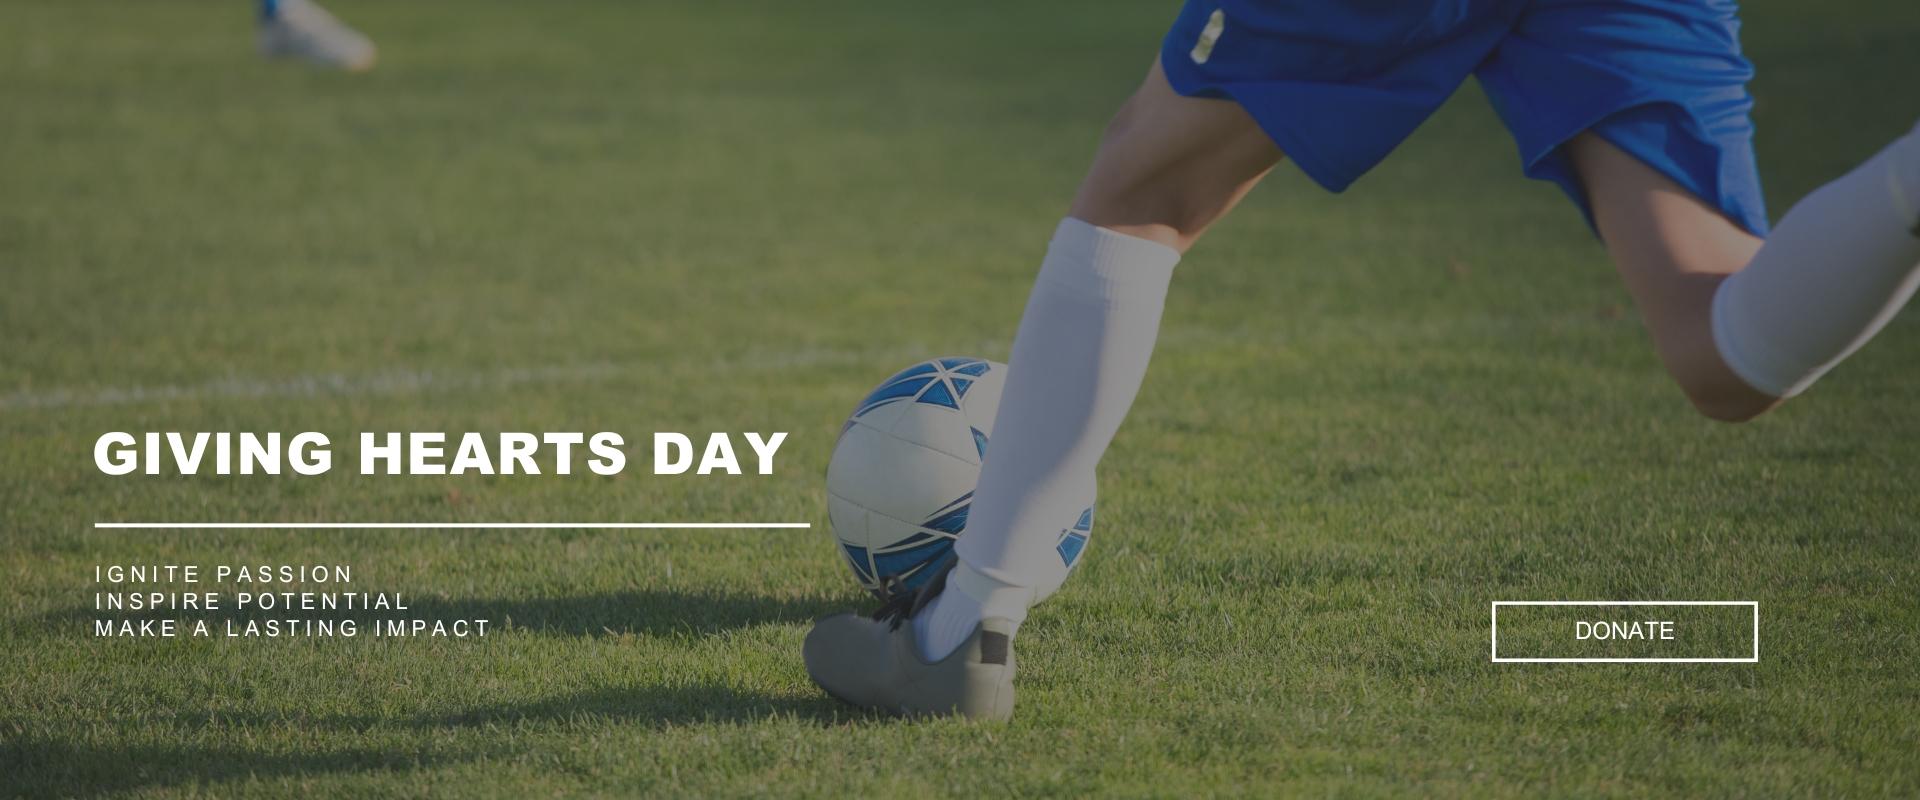 GIVING HEARTS DAY - Ignite Passion, Inspire Potential, Making a Lasting Impact - Bottom half of person running and kicking a soccer ball on a field - Donate Button